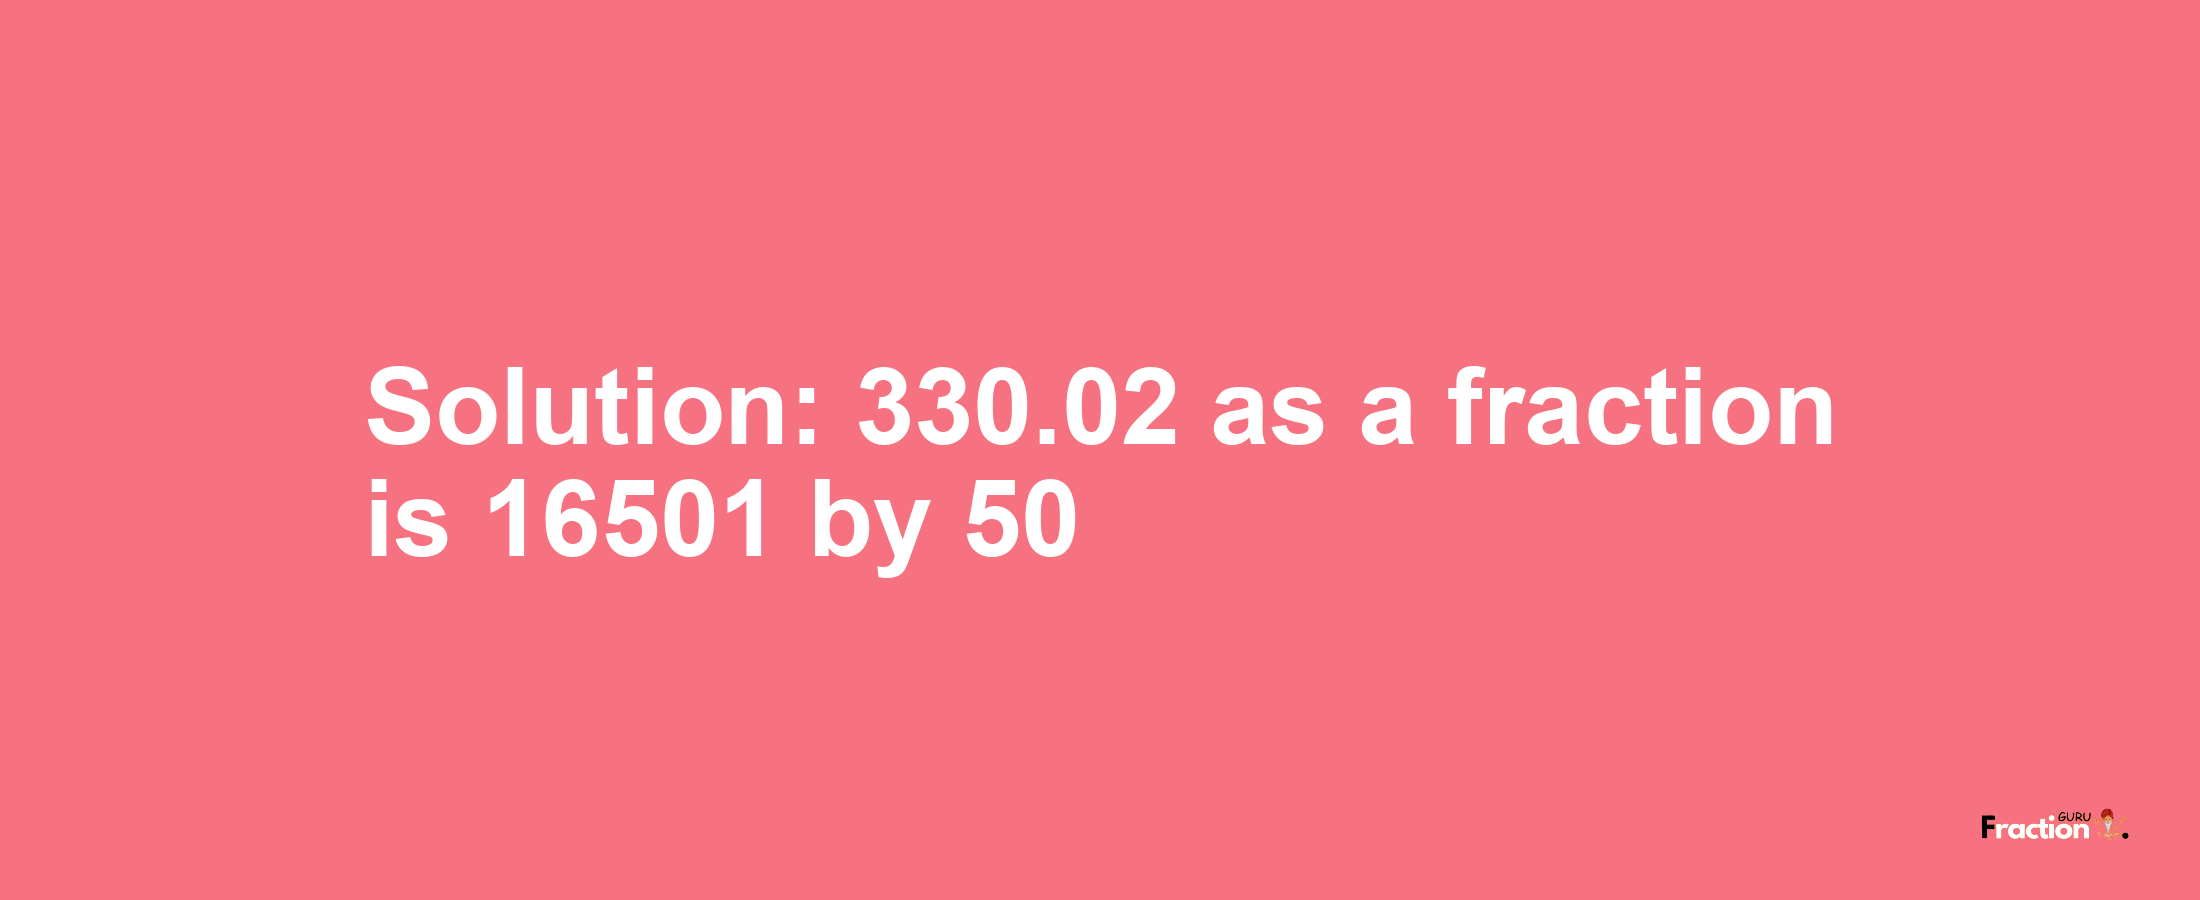 Solution:330.02 as a fraction is 16501/50